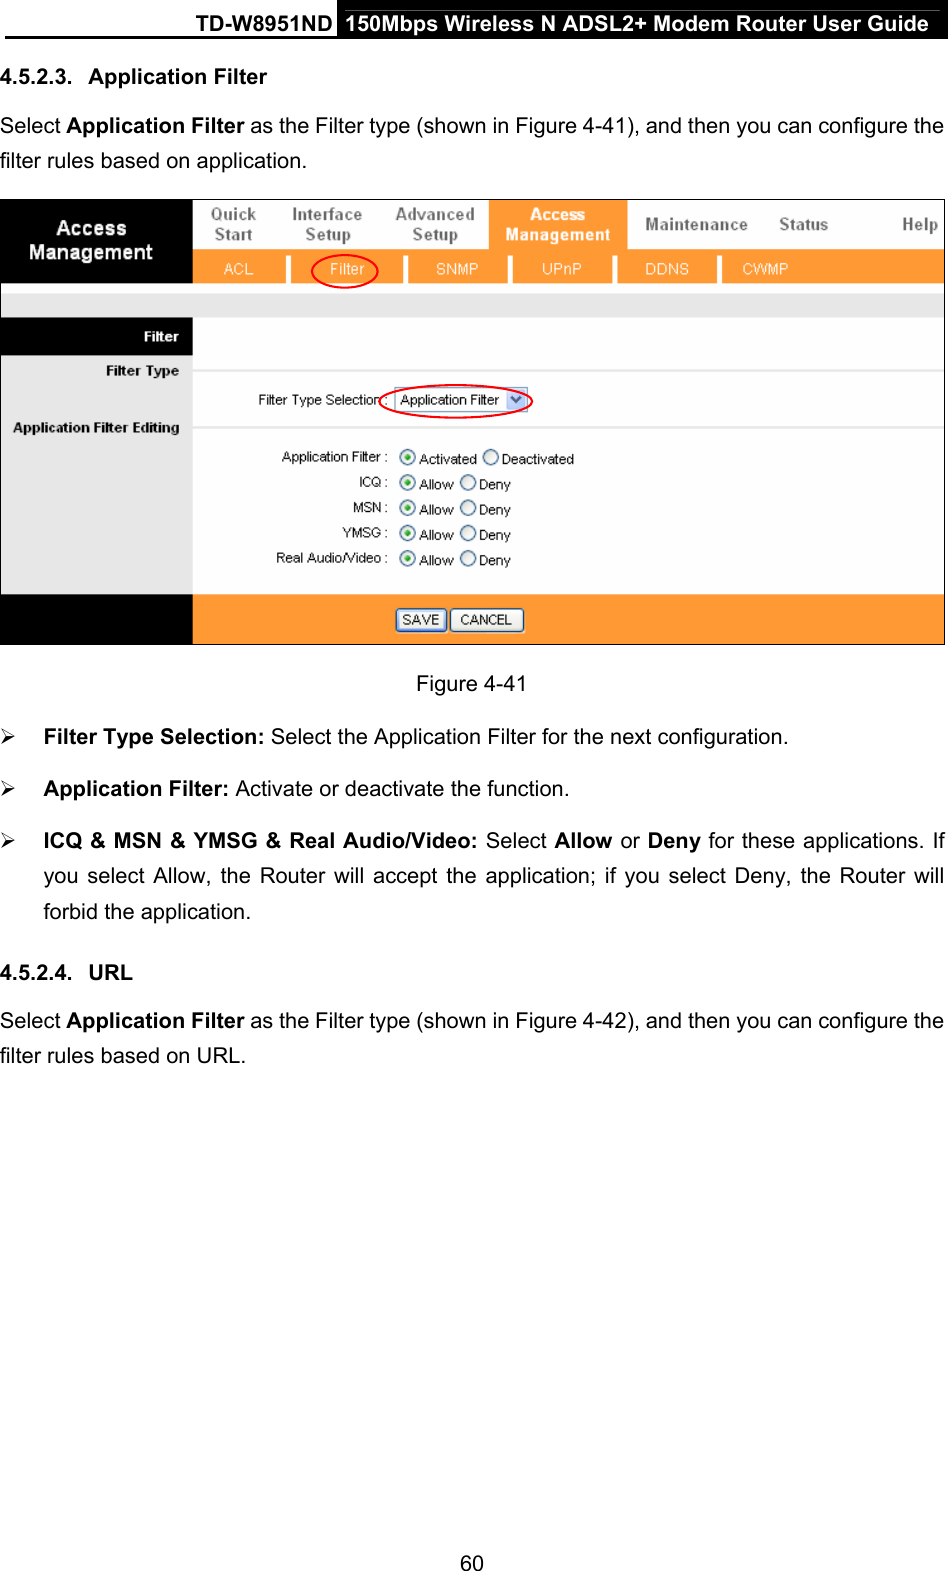 TD-W8951ND  150Mbps Wireless N ADSL2+ Modem Router User Guide 4.5.2.3.  Application Filter Select Application Filter as the Filter type (shown in Figure 4-41), and then you can configure the filter rules based on application.  Figure 4-41 ¾ Filter Type Selection: Select the Application Filter for the next configuration. ¾ Application Filter: Activate or deactivate the function. ¾ ICQ &amp; MSN &amp; YMSG &amp; Real Audio/Video: Select Allow or Deny for these applications. If you select Allow, the Router will accept the application; if you select Deny, the Router will forbid the application. 4.5.2.4.  URL Select Application Filter as the Filter type (shown in Figure 4-42), and then you can configure the filter rules based on URL. 60 